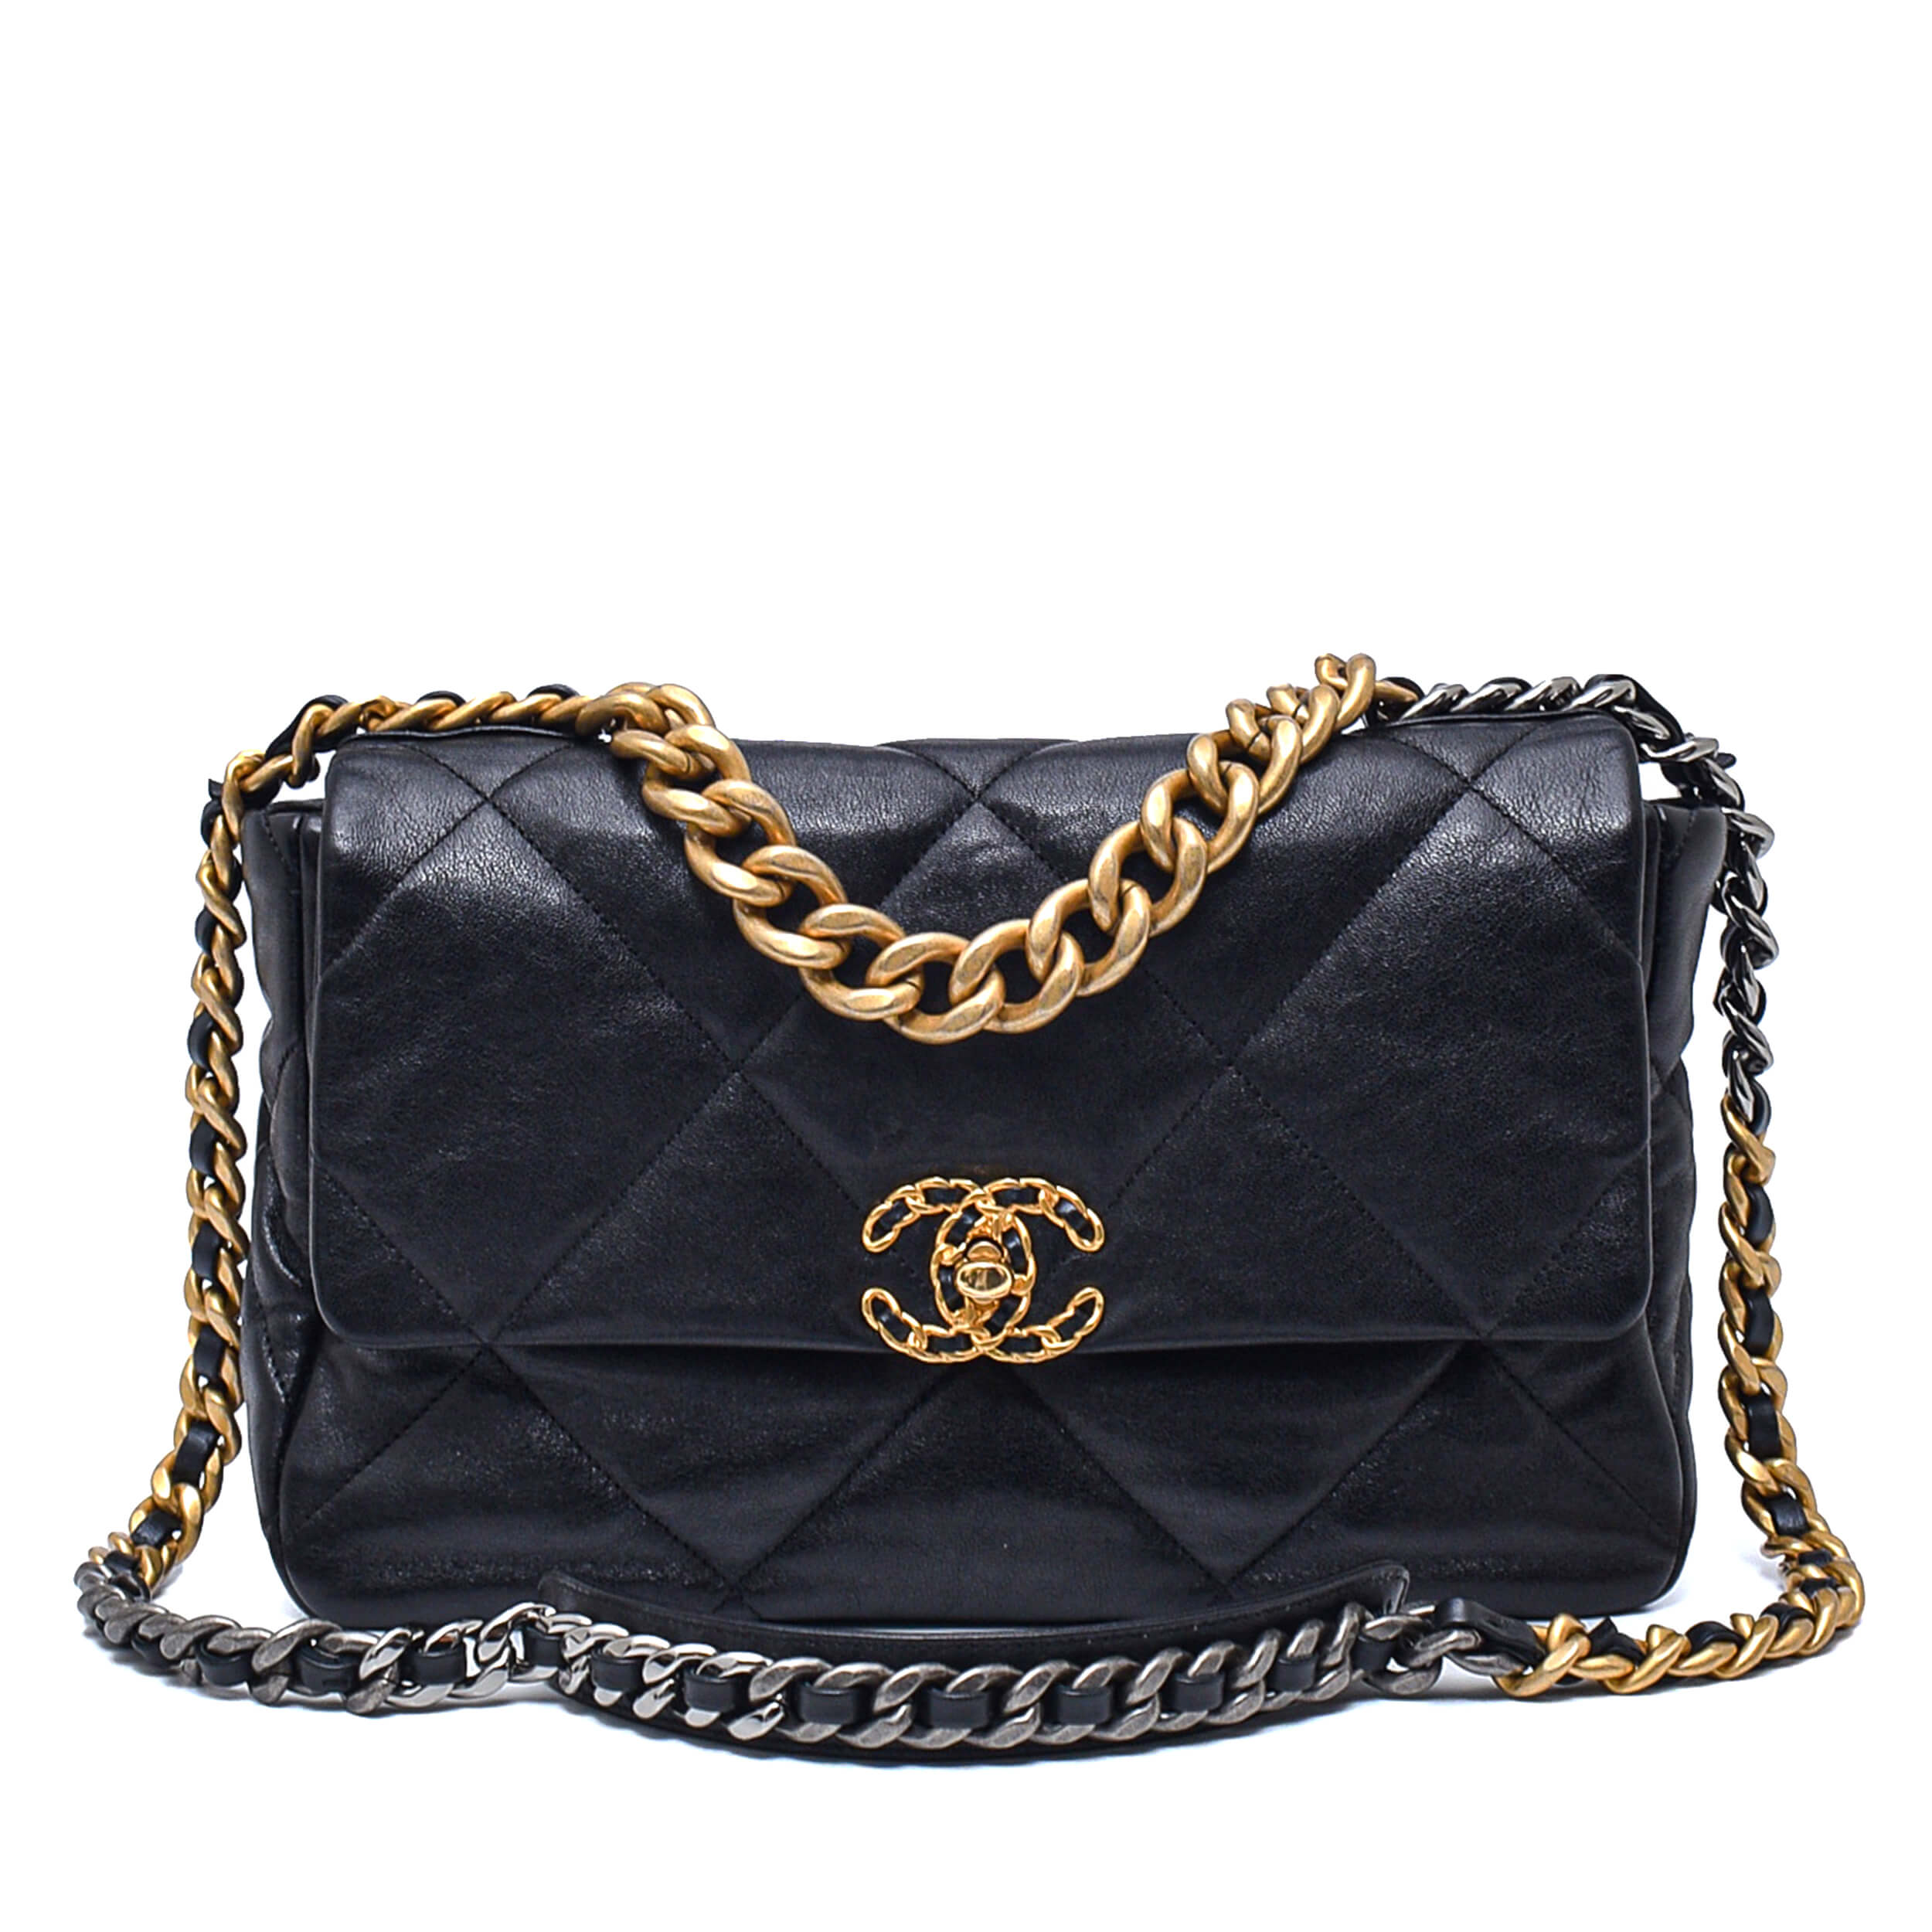 Chanel - Black Quilted Lambskin Shiny Leather No19 Large Bag